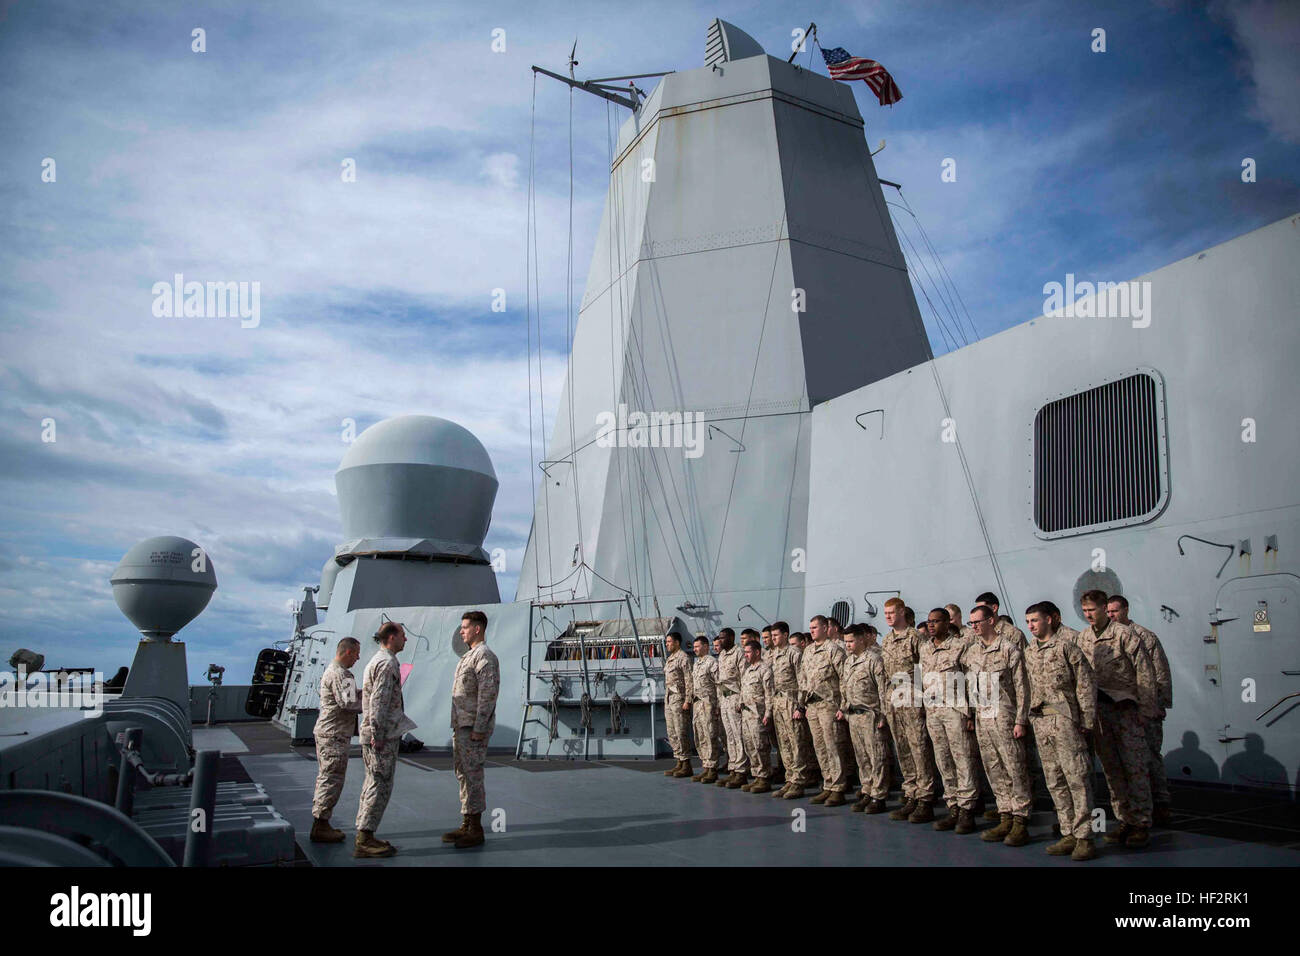 Marines with Combat Logistics Battalion 24, 24th Marine Expeditionary Unit, stand in formation during a promotion ceremony aboard the USS New York, at sea, Jan. 10, 2015. The 24th MEU and Iwo Jima Amphibious Ready Group are conducting naval operations in the U.S. 6th Fleet of operations in support of U.S. national security interests in Europe. (U.S. Marine Corps photo by Cpl. Todd F. Michalek) 24th MEU Promotion-At-Sea 150110-M-YH418-001 Stock Photo